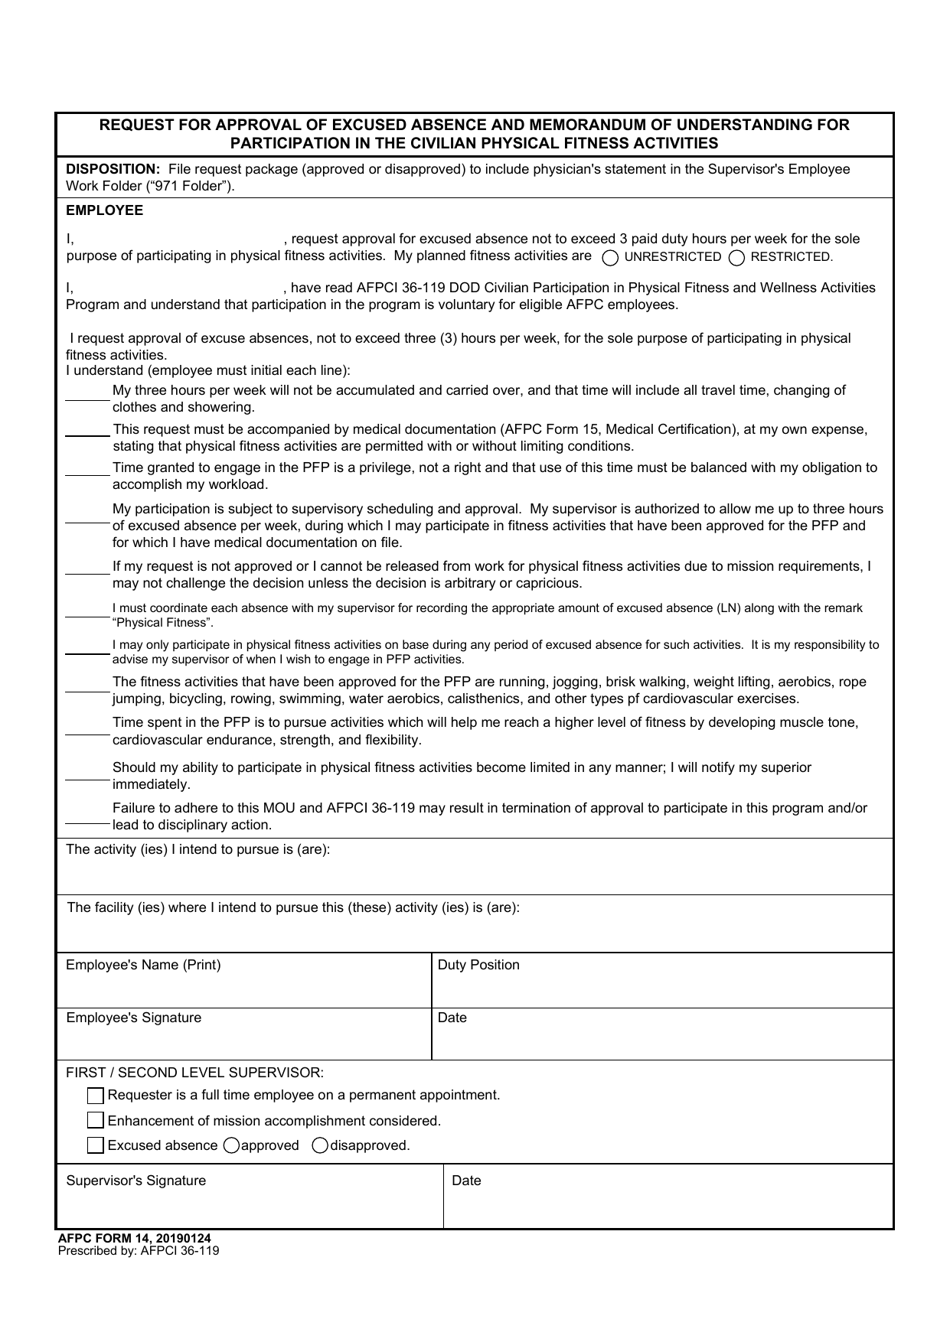 AFPC Form 14 Request for Approval for Excused Absence and Memorandum of Understanding for Participation in the Civilian Physical Fitness Activities, Page 1